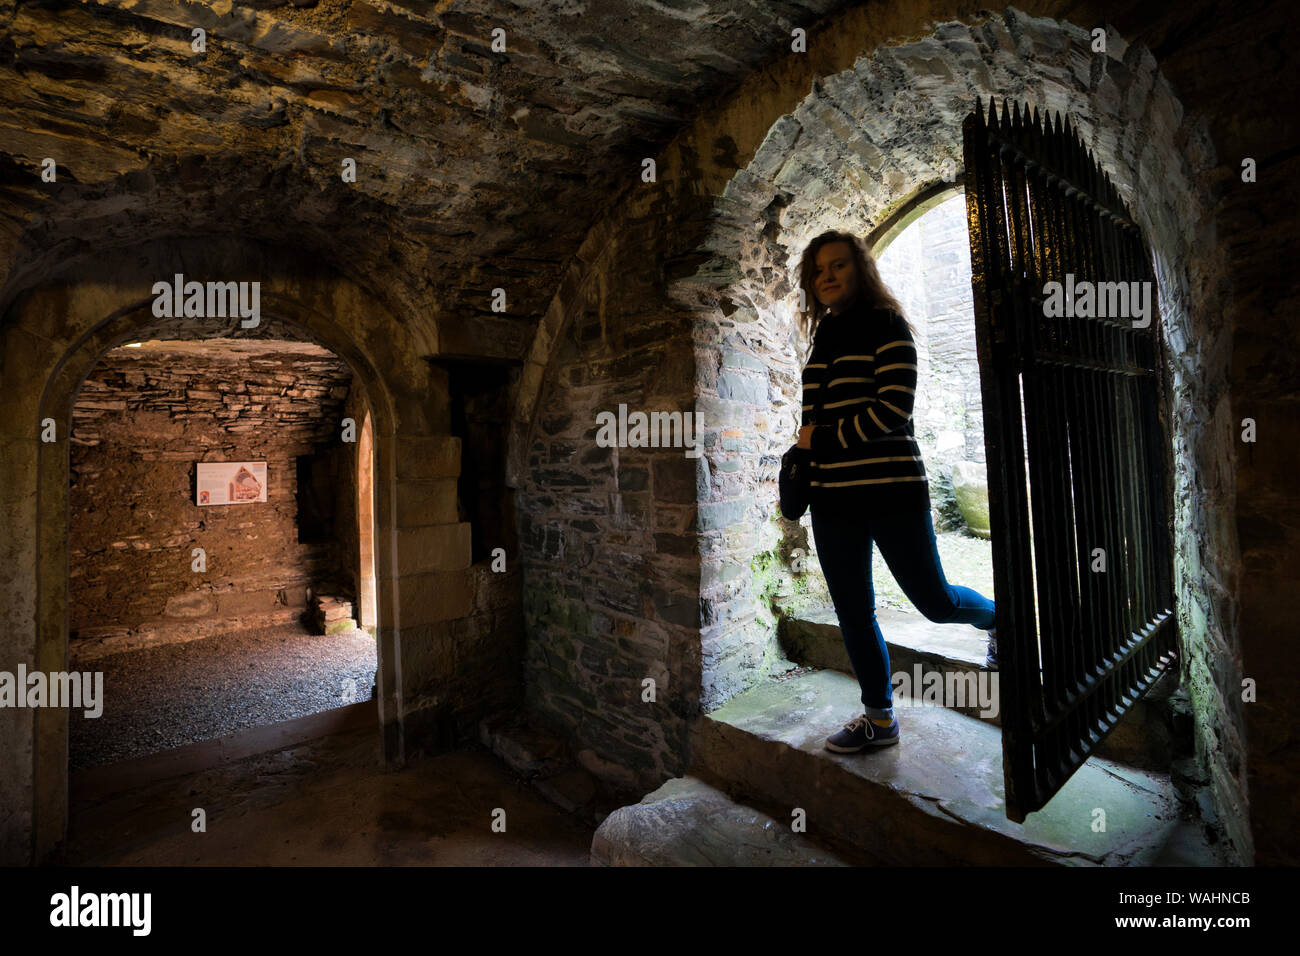 Teenage girl steps into the Priory catacombs where ancient Celtic crosses were found in the Birthplace of Christianity dating from 4th century, Whitho Stock Photo